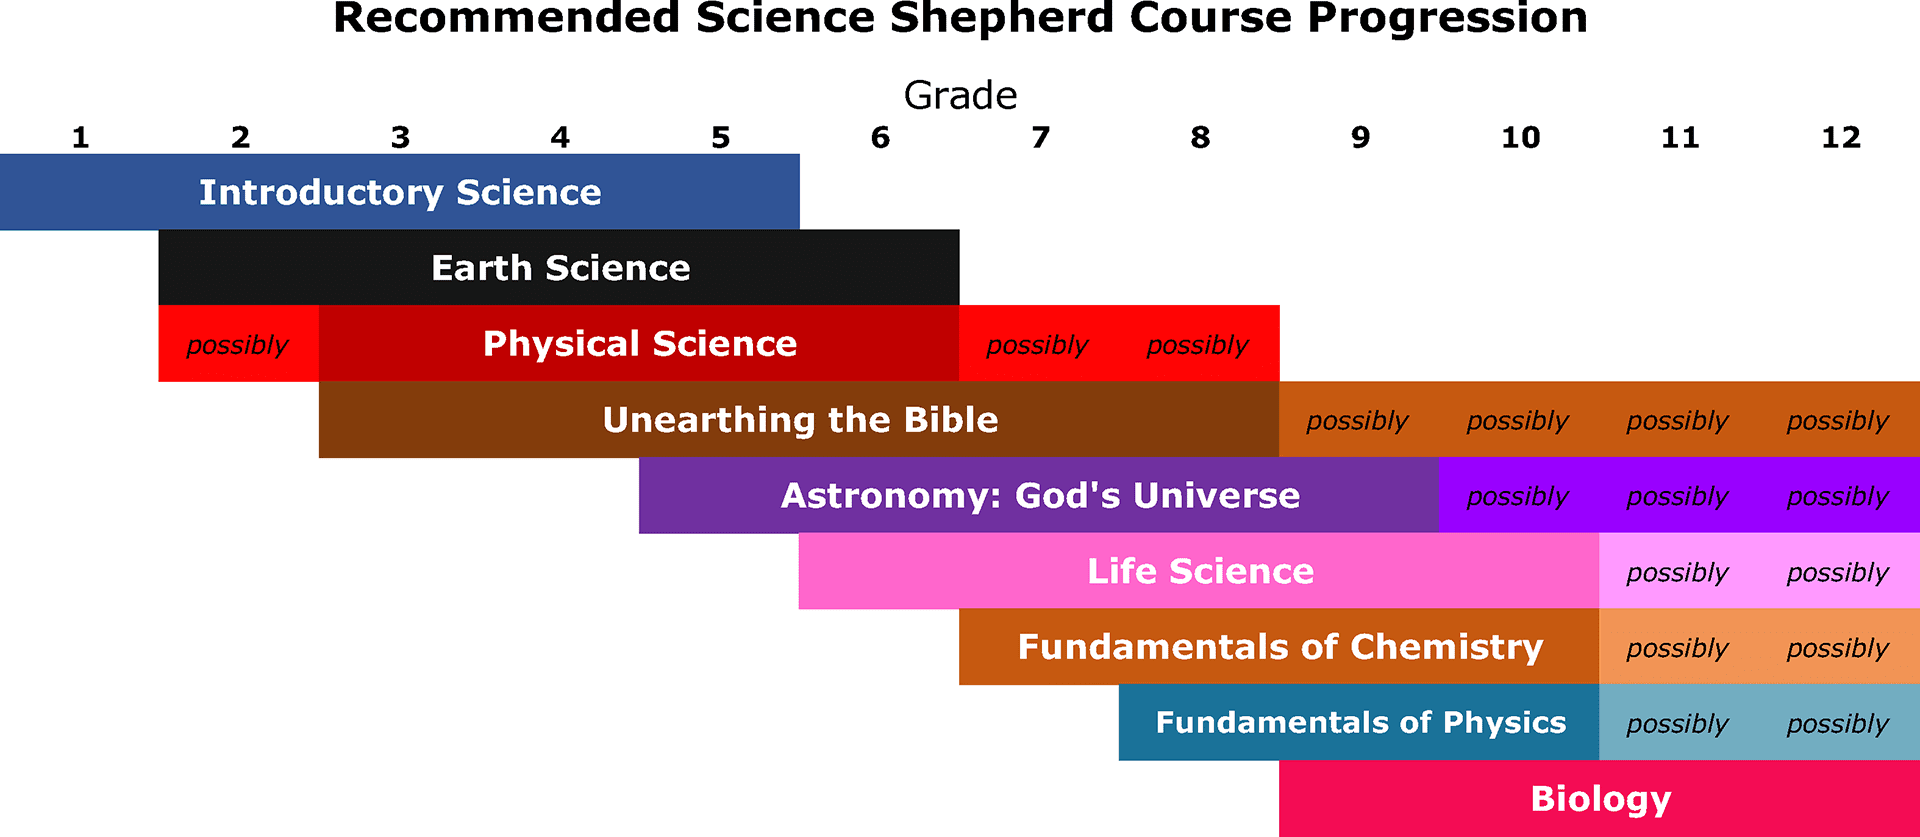 Graph of recommended Science Shepherd homeschool curriculum course progression